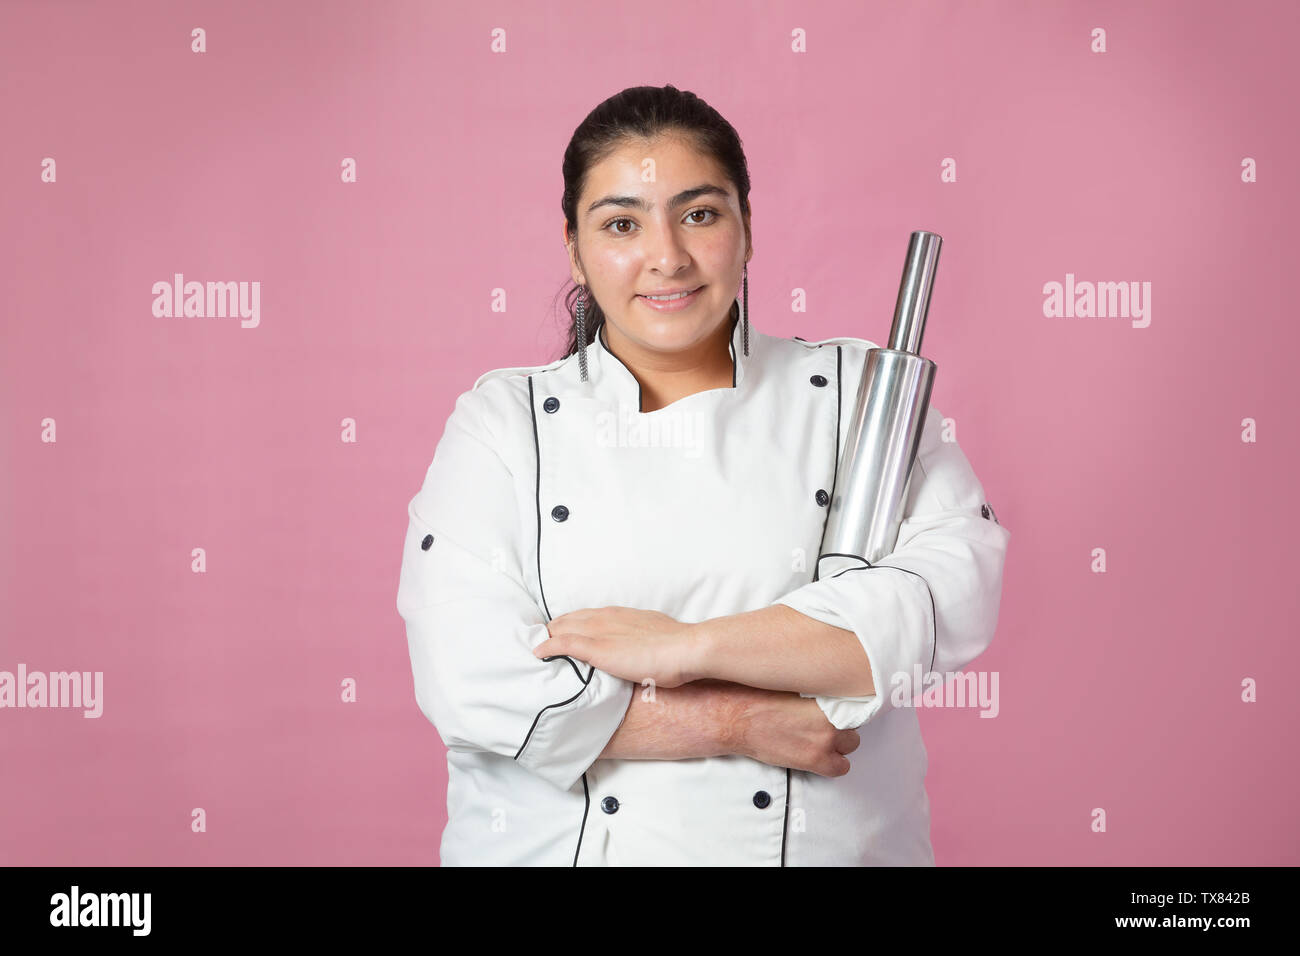 Latin chef with arms crossed and holding his stainless steel roller- woman chef Stock Photo